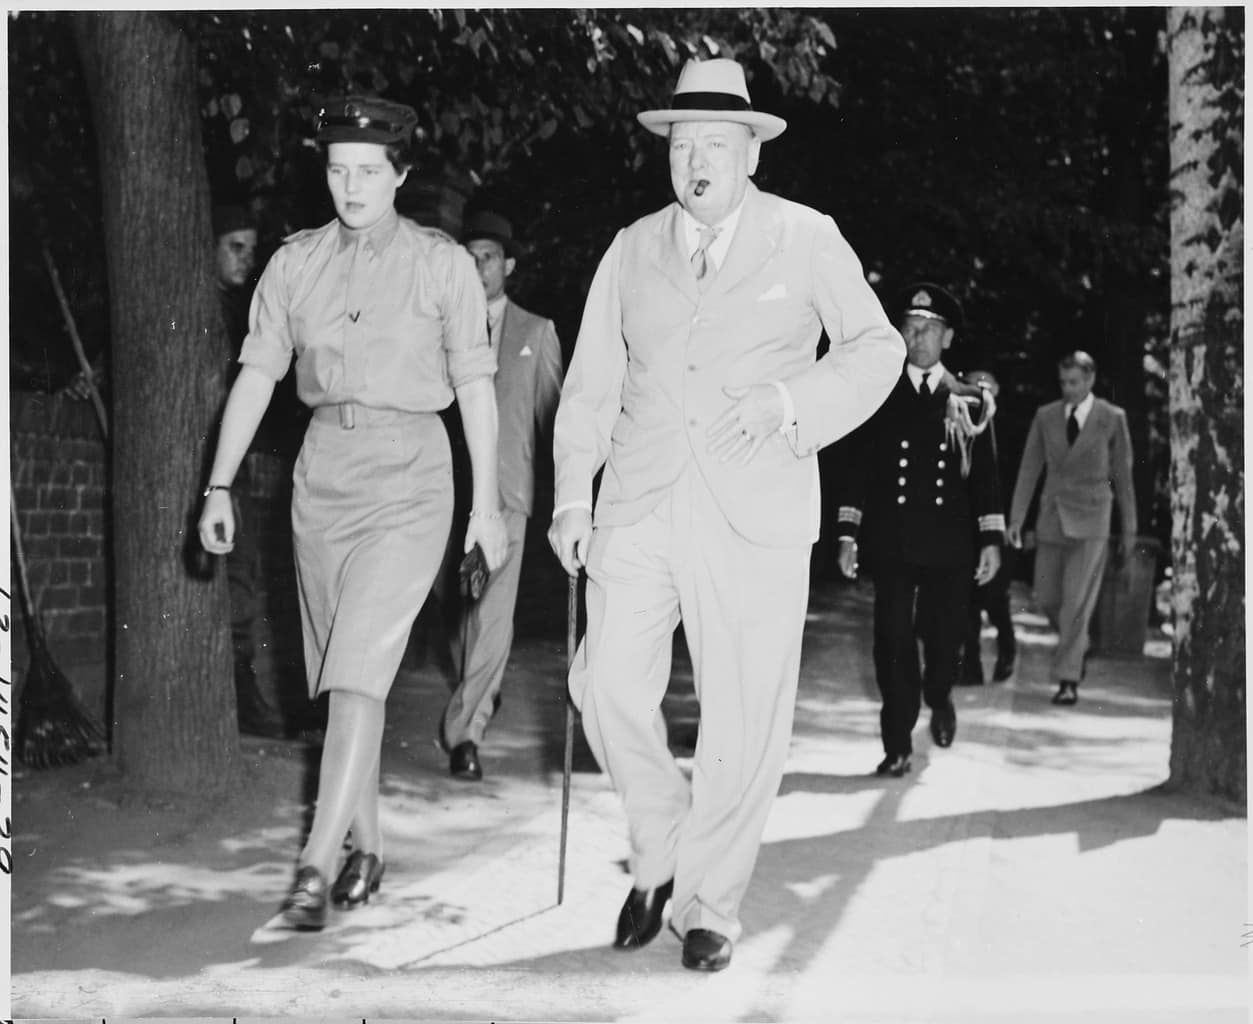 The Potsdam Conference - July 16th 1945 - Prime Minister Winston Churchill of Great Britain, accompanied by his daughter, Mary Churchill, leaves the "Little White House"